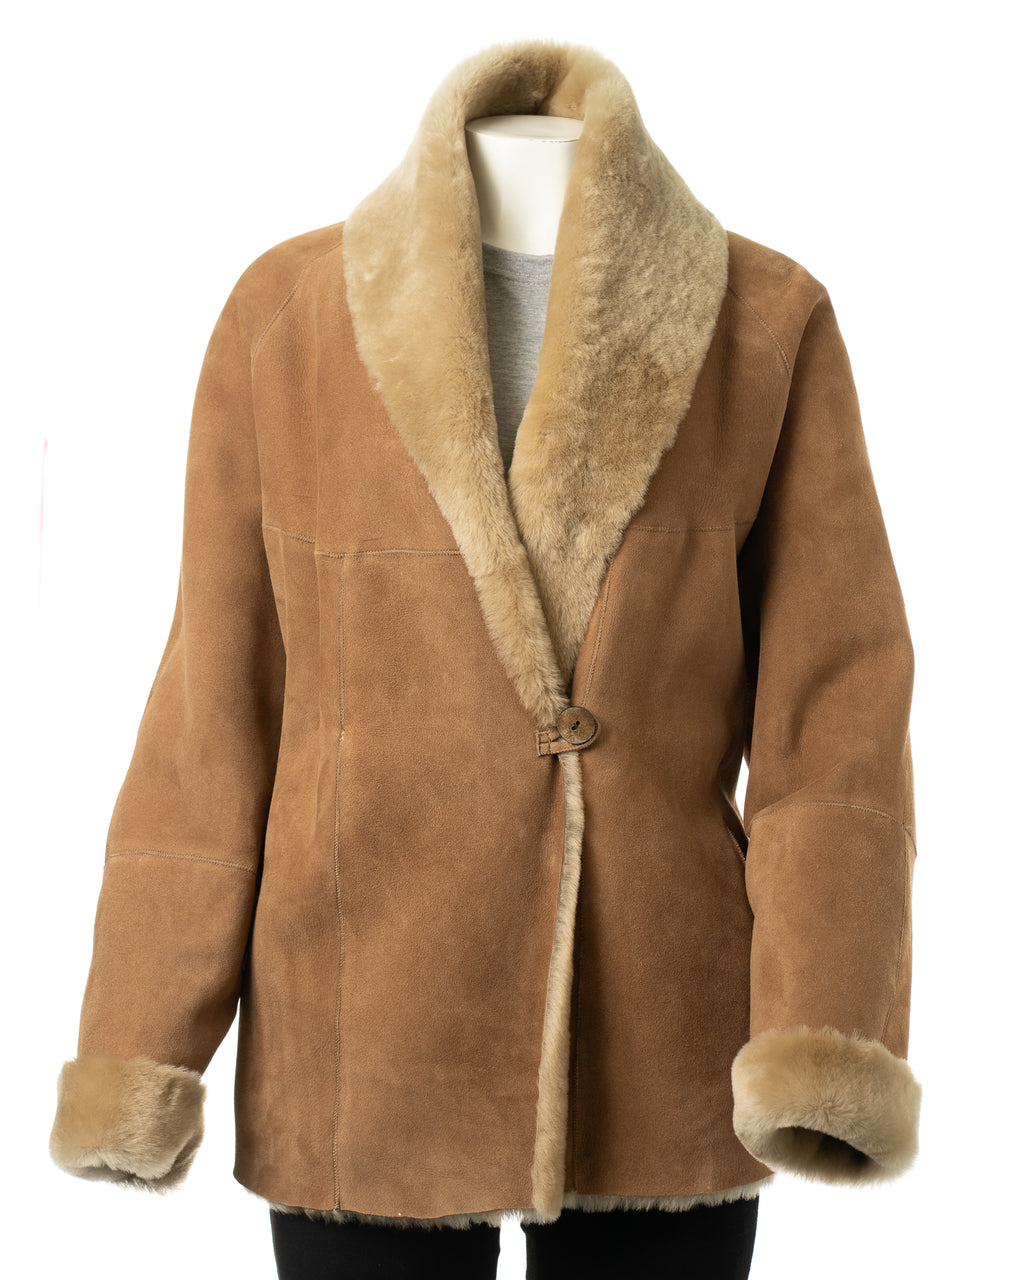 Ladies Relaxed Fit Cappuccino Shearling Sheepskin Jacket: Issy